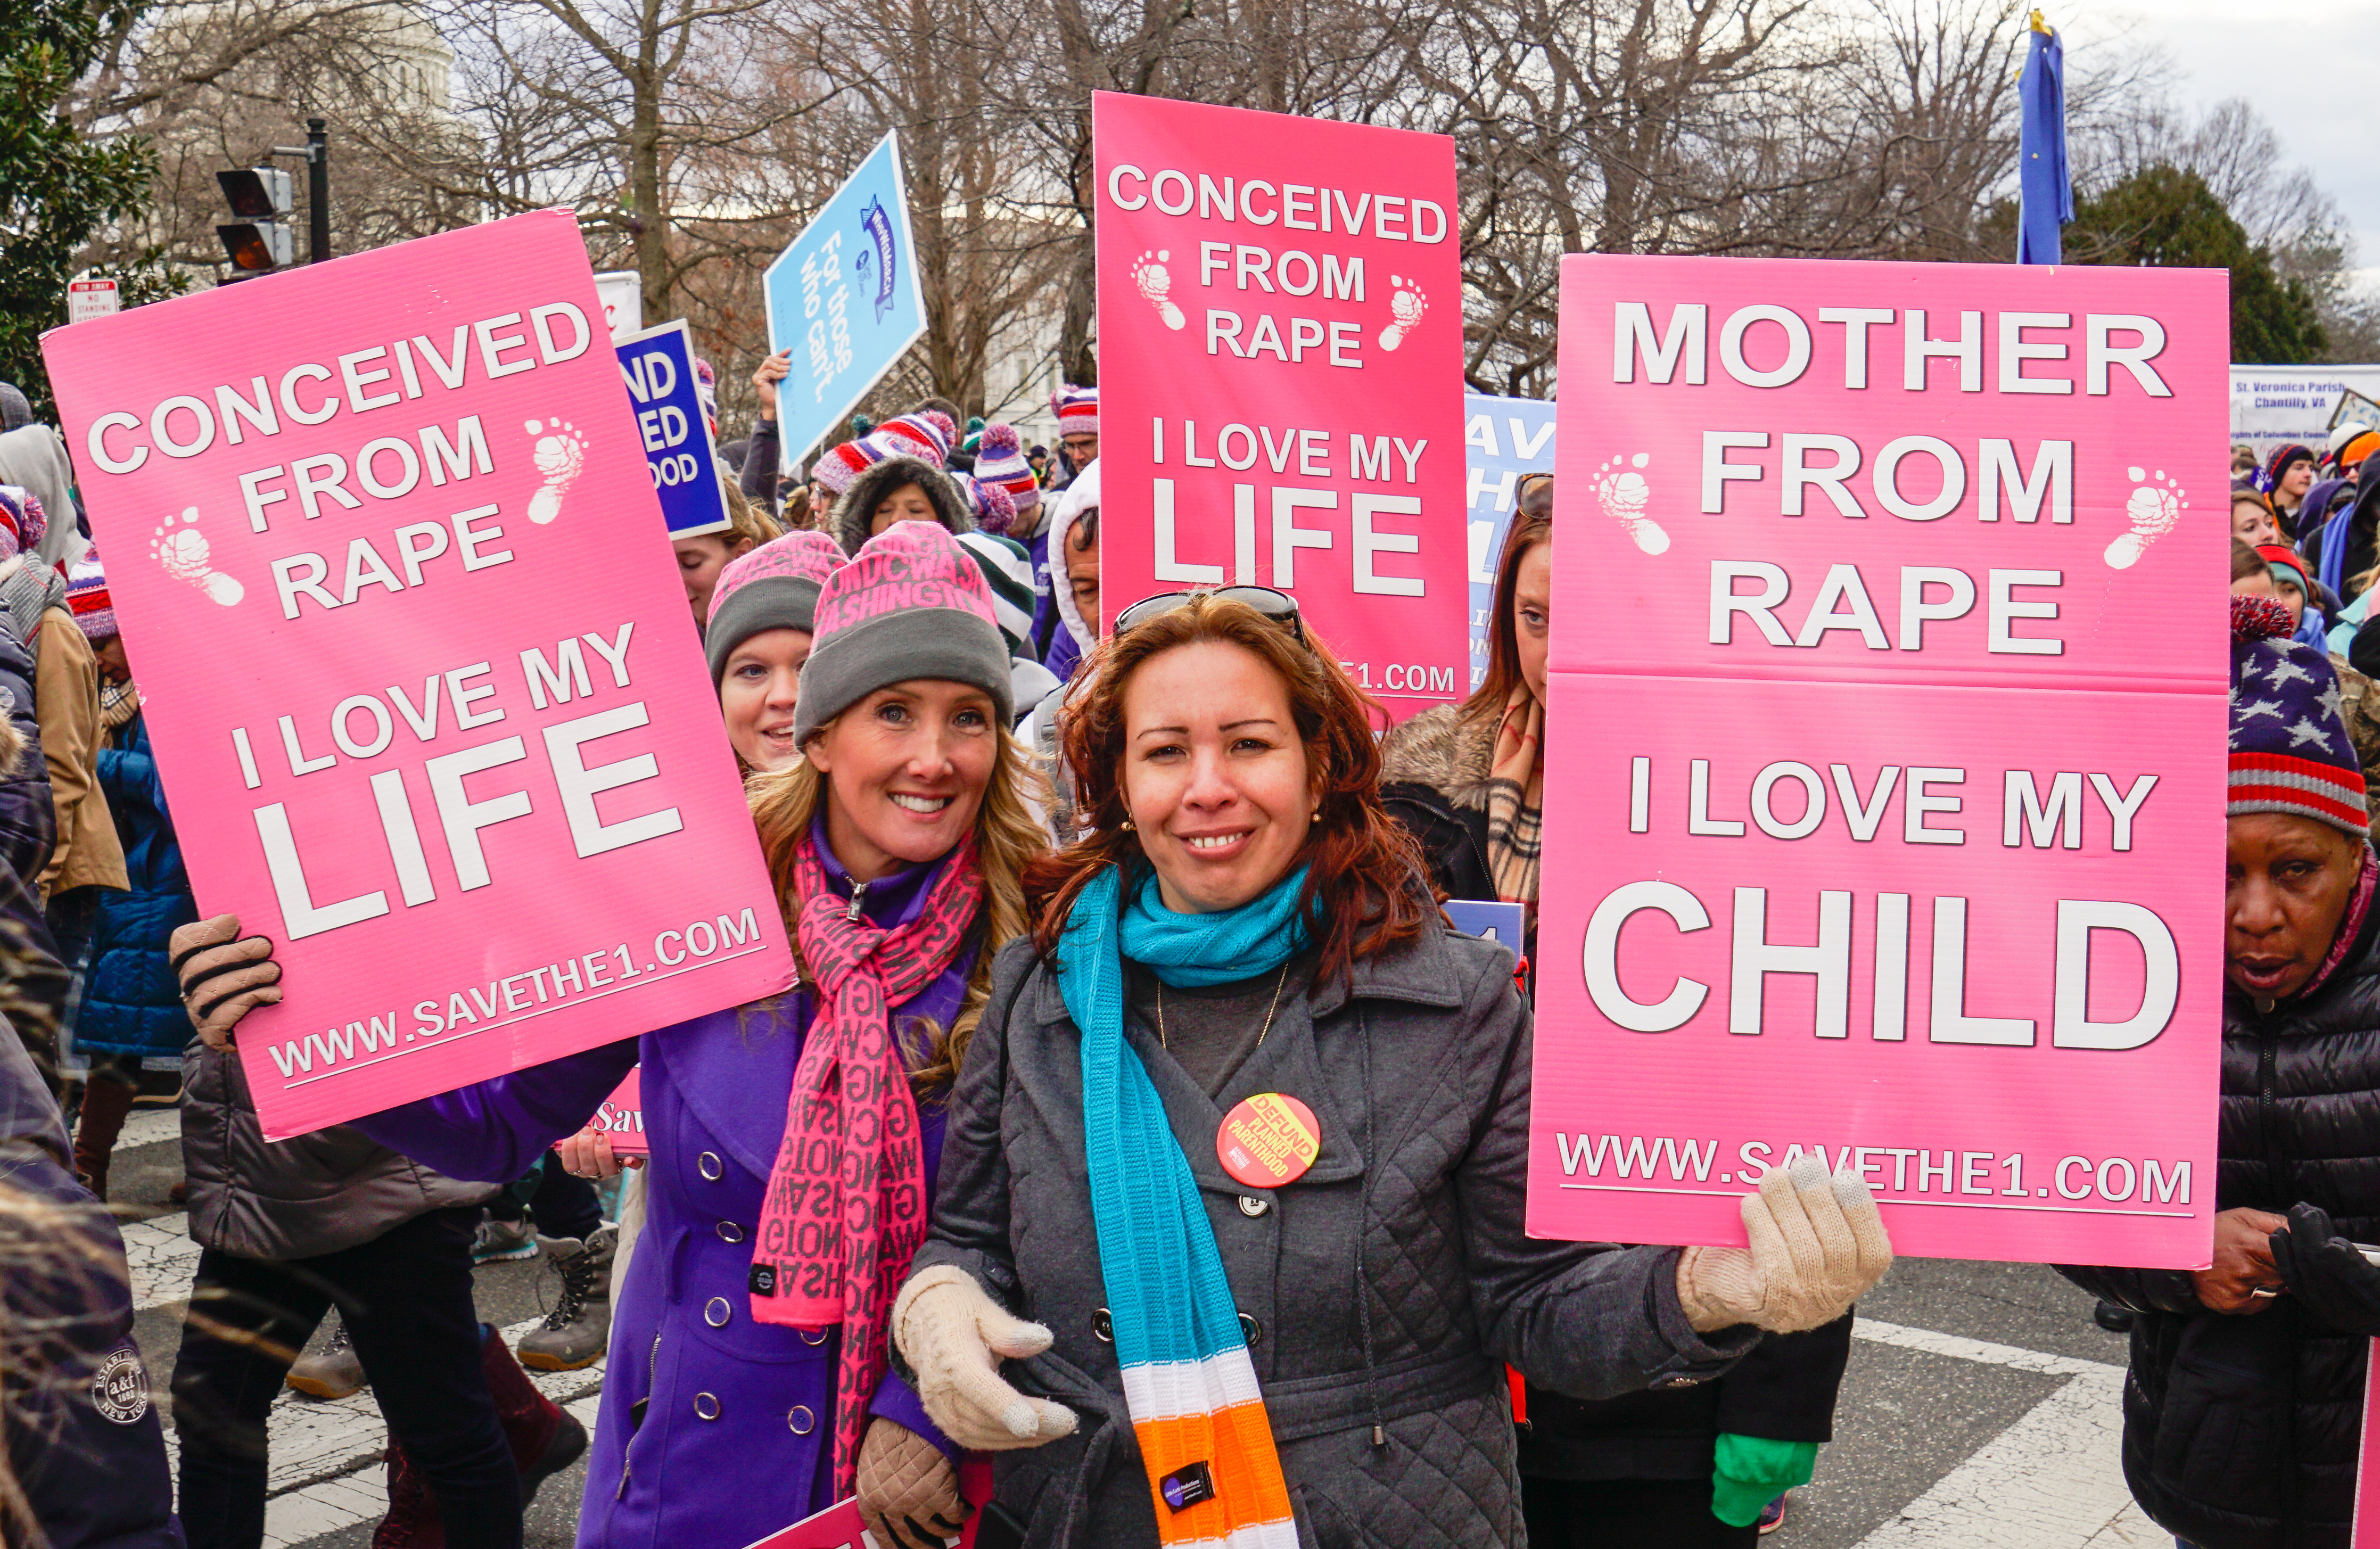 Washington, DC - January 27, 2017- Women holding signs advocate against abortion, even in the case of rape, during the annual March for Life. Xavier Ascanio, Shutterstock.